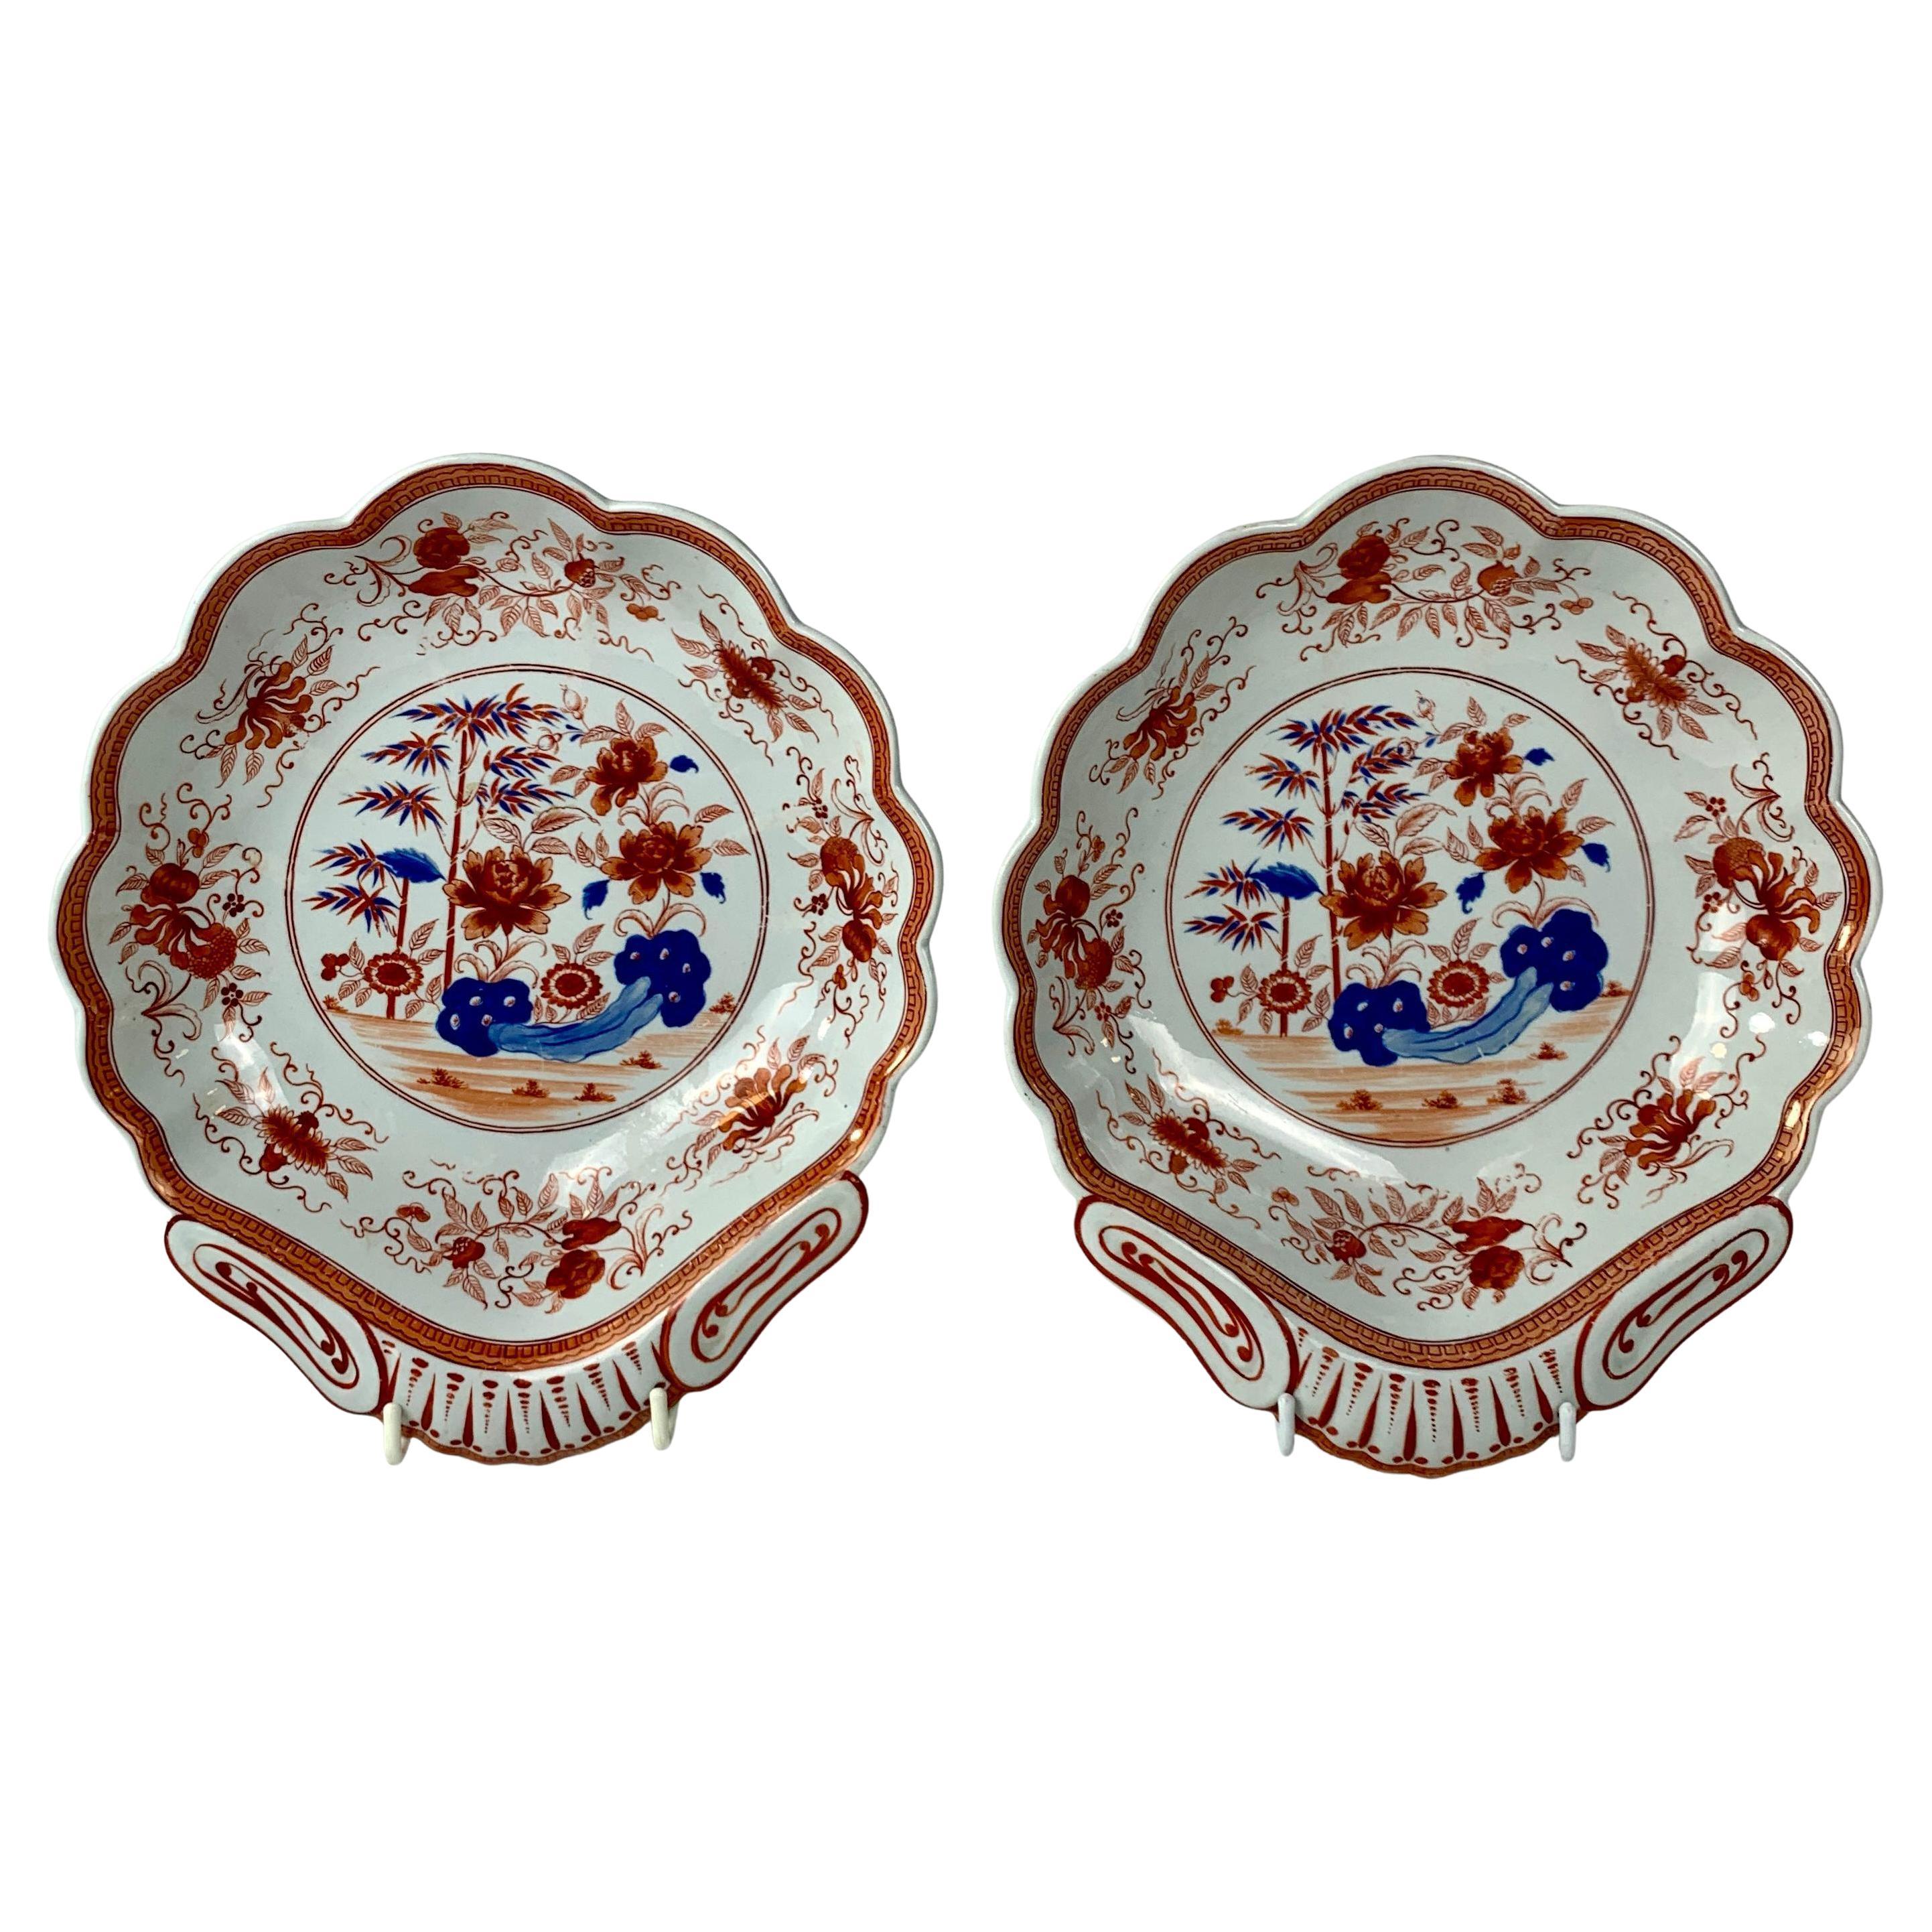 Pair Spode Shell-Shaped Dishes Orange and Blue Early 19th Century, Circa 1820 For Sale